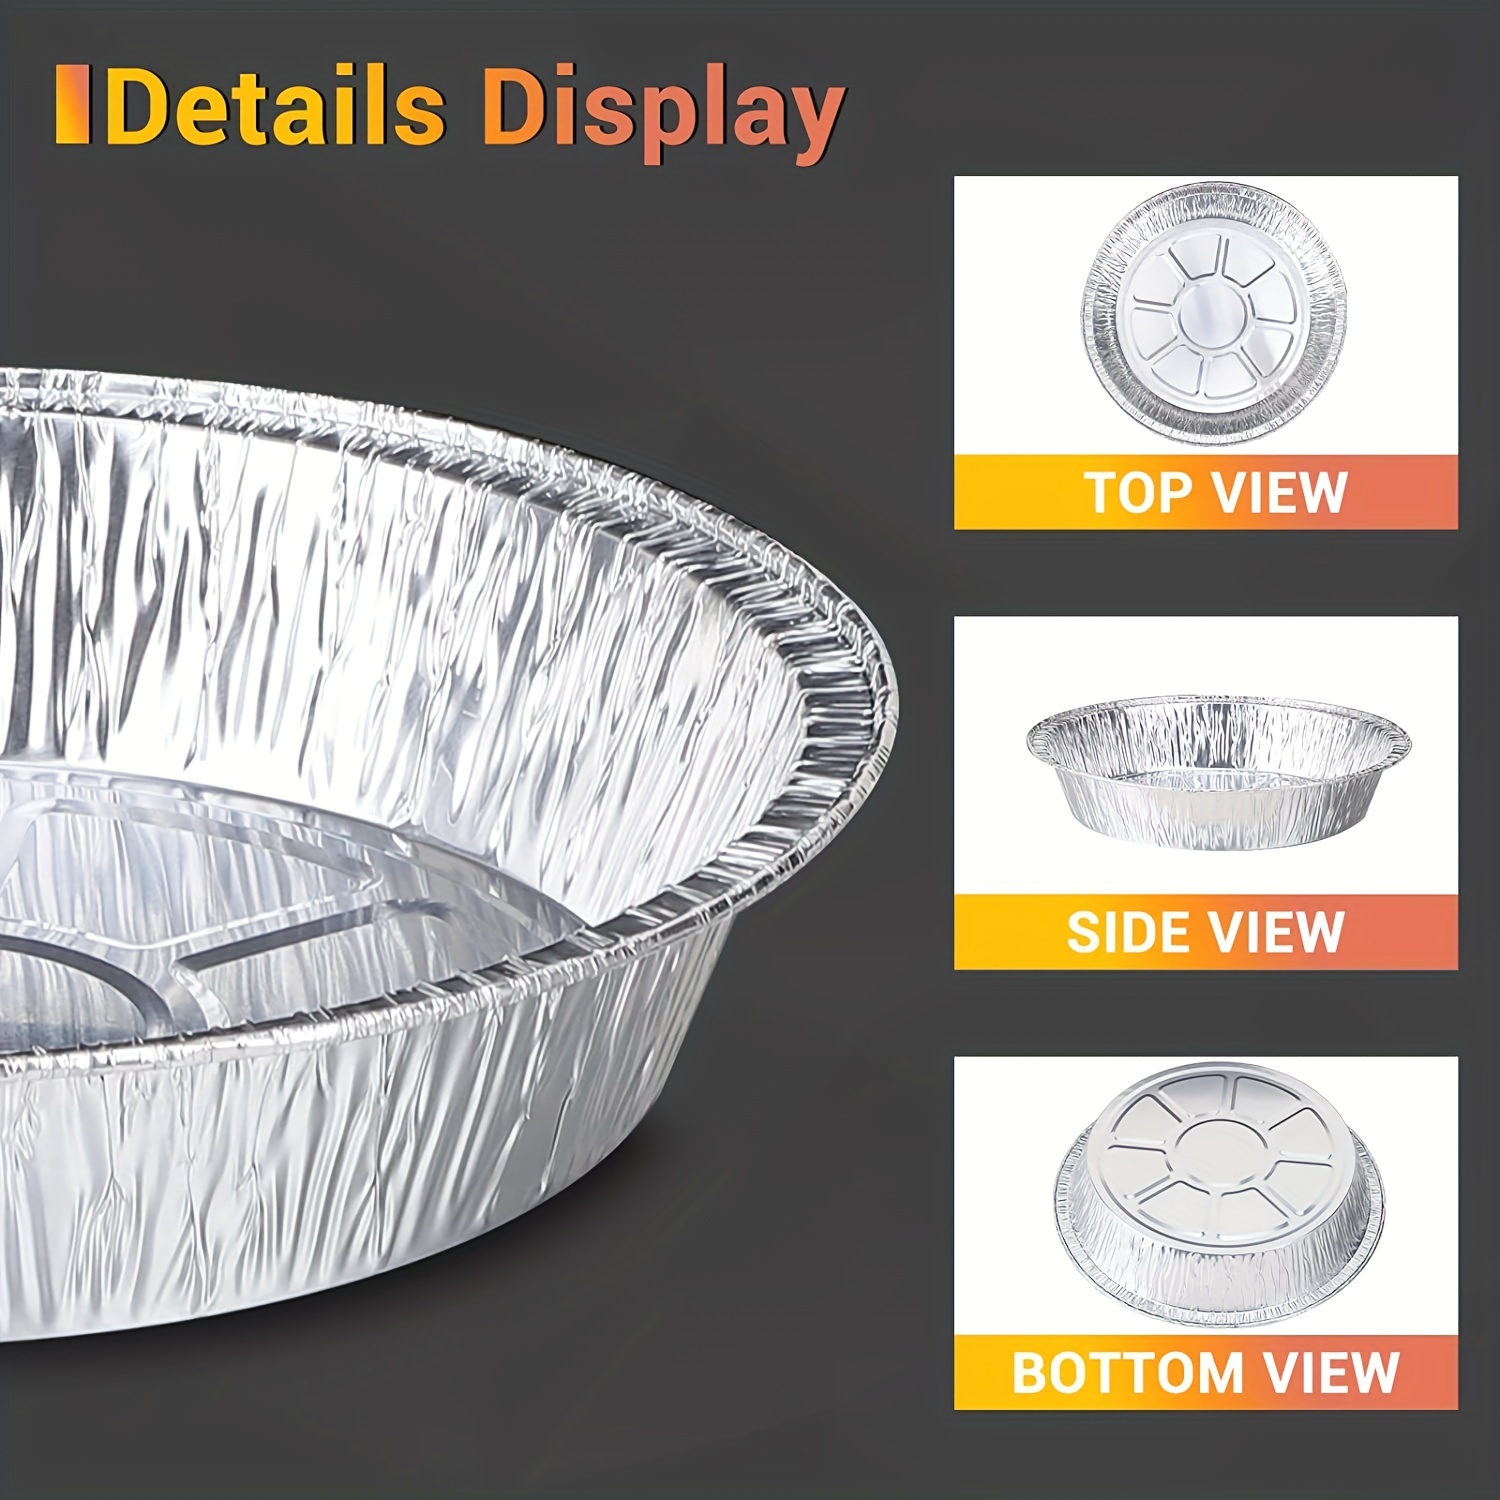 5 Inch Disposable Round Foil Pie Pan,Aluminum Foil Baking Pie Tins,Oven  Safe Cake Pan for Baking,Cooking,Storage or Reheating